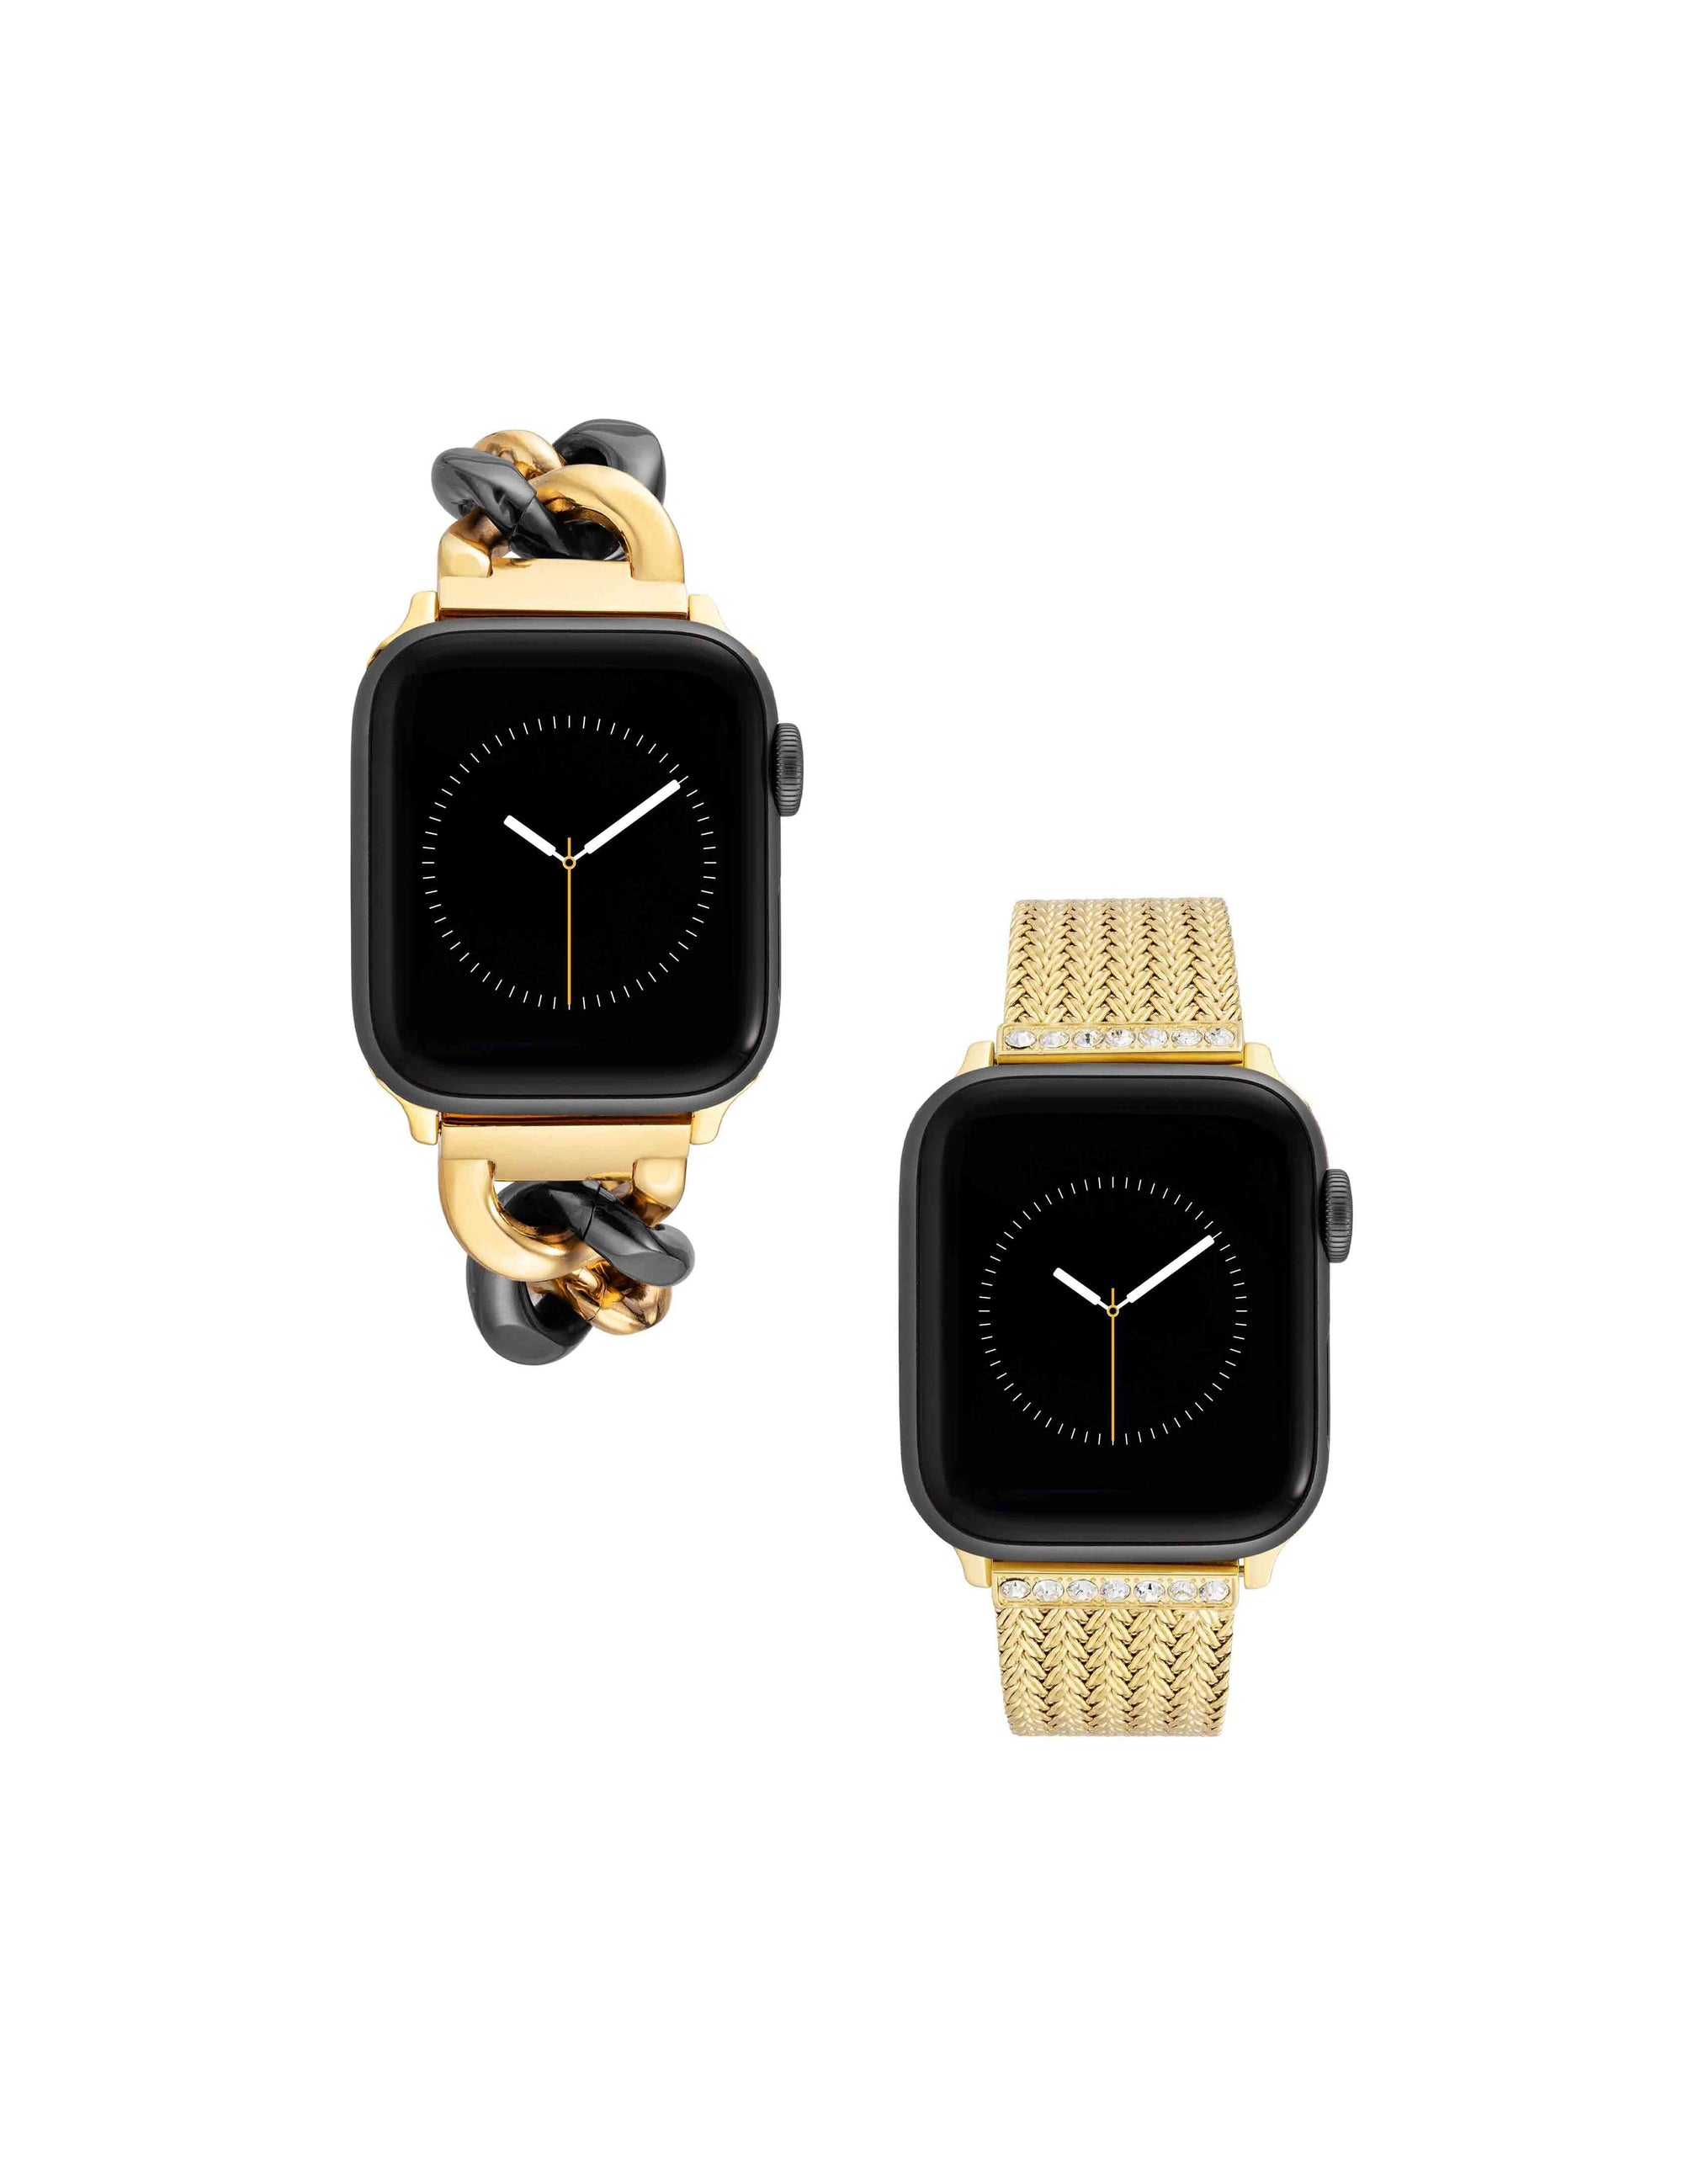 Buy Apple Watch Strap Louis Vuitton Online In India -  India